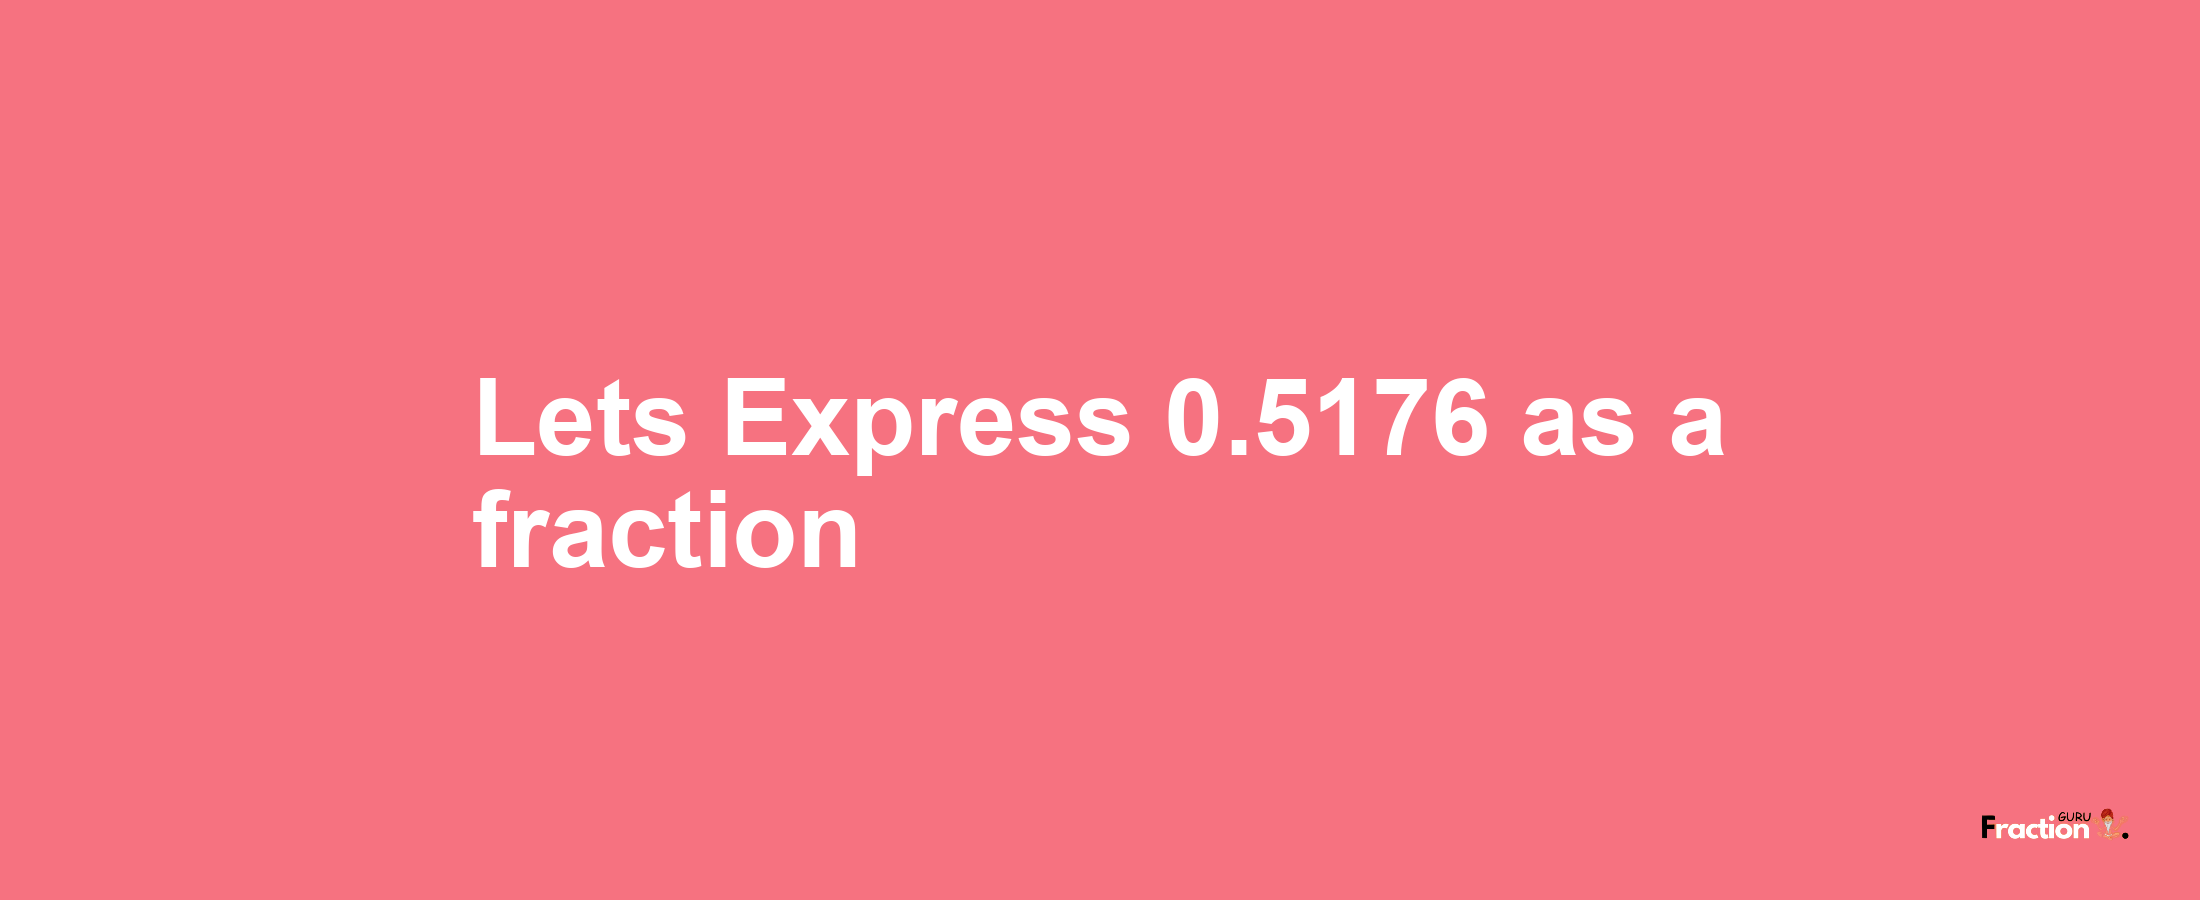 Lets Express 0.5176 as afraction